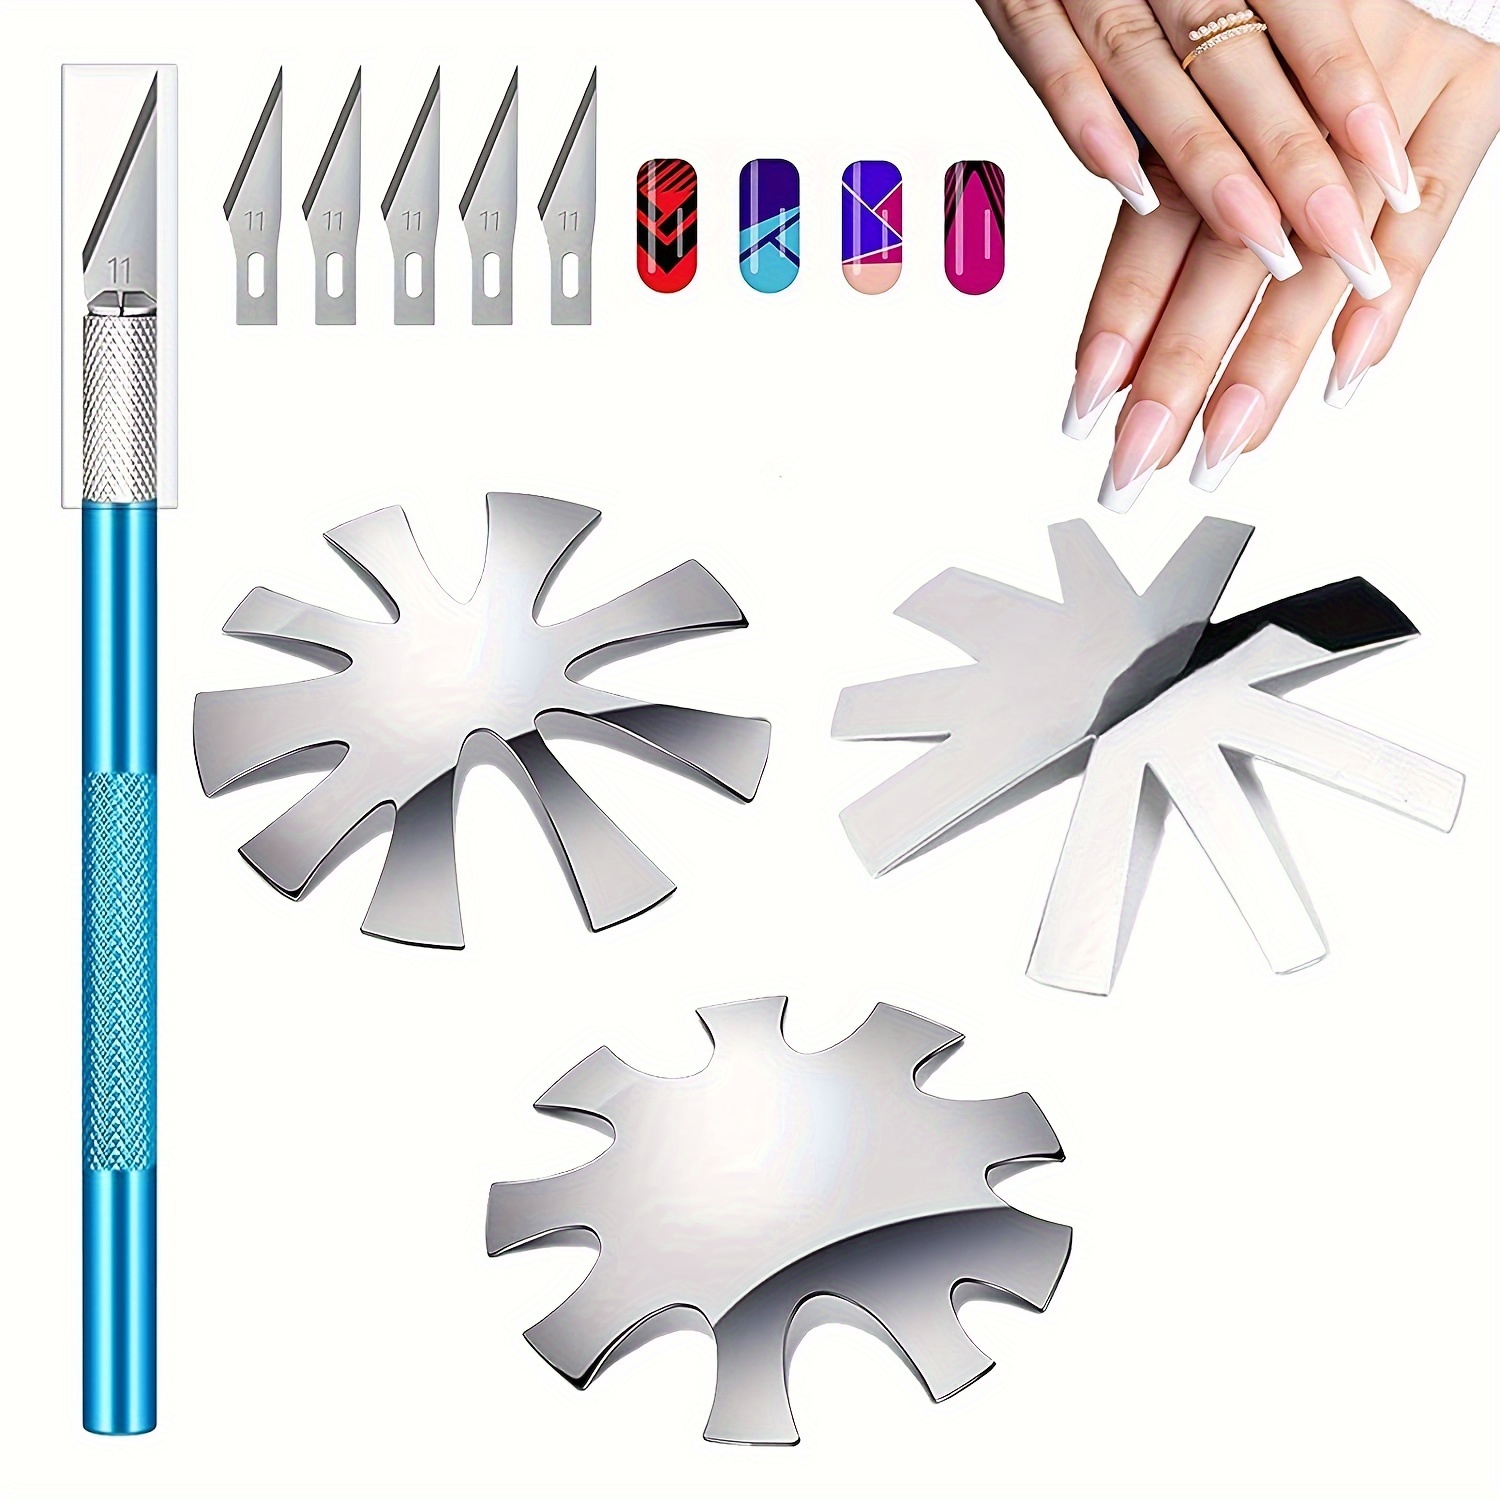 1PC Deep V Line French Nails Cutter Easy Smile Line Almond Shape Tips  Template | eBay